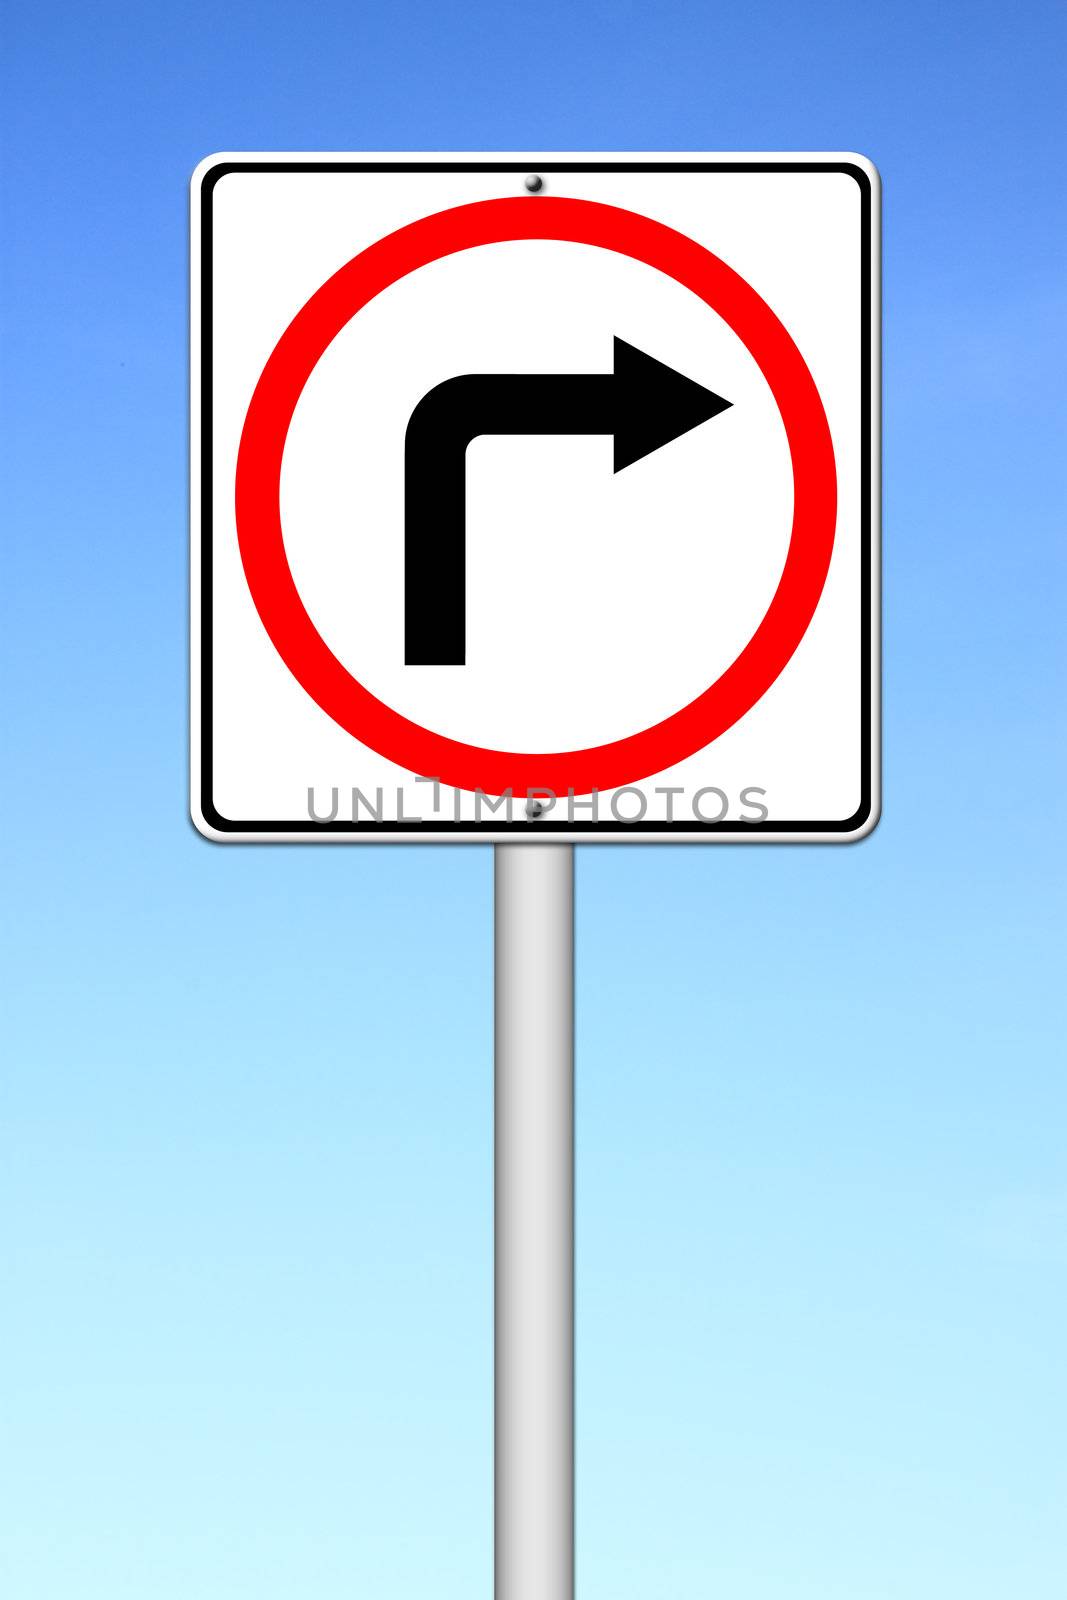 Traffic sign show the turn right by geargodz